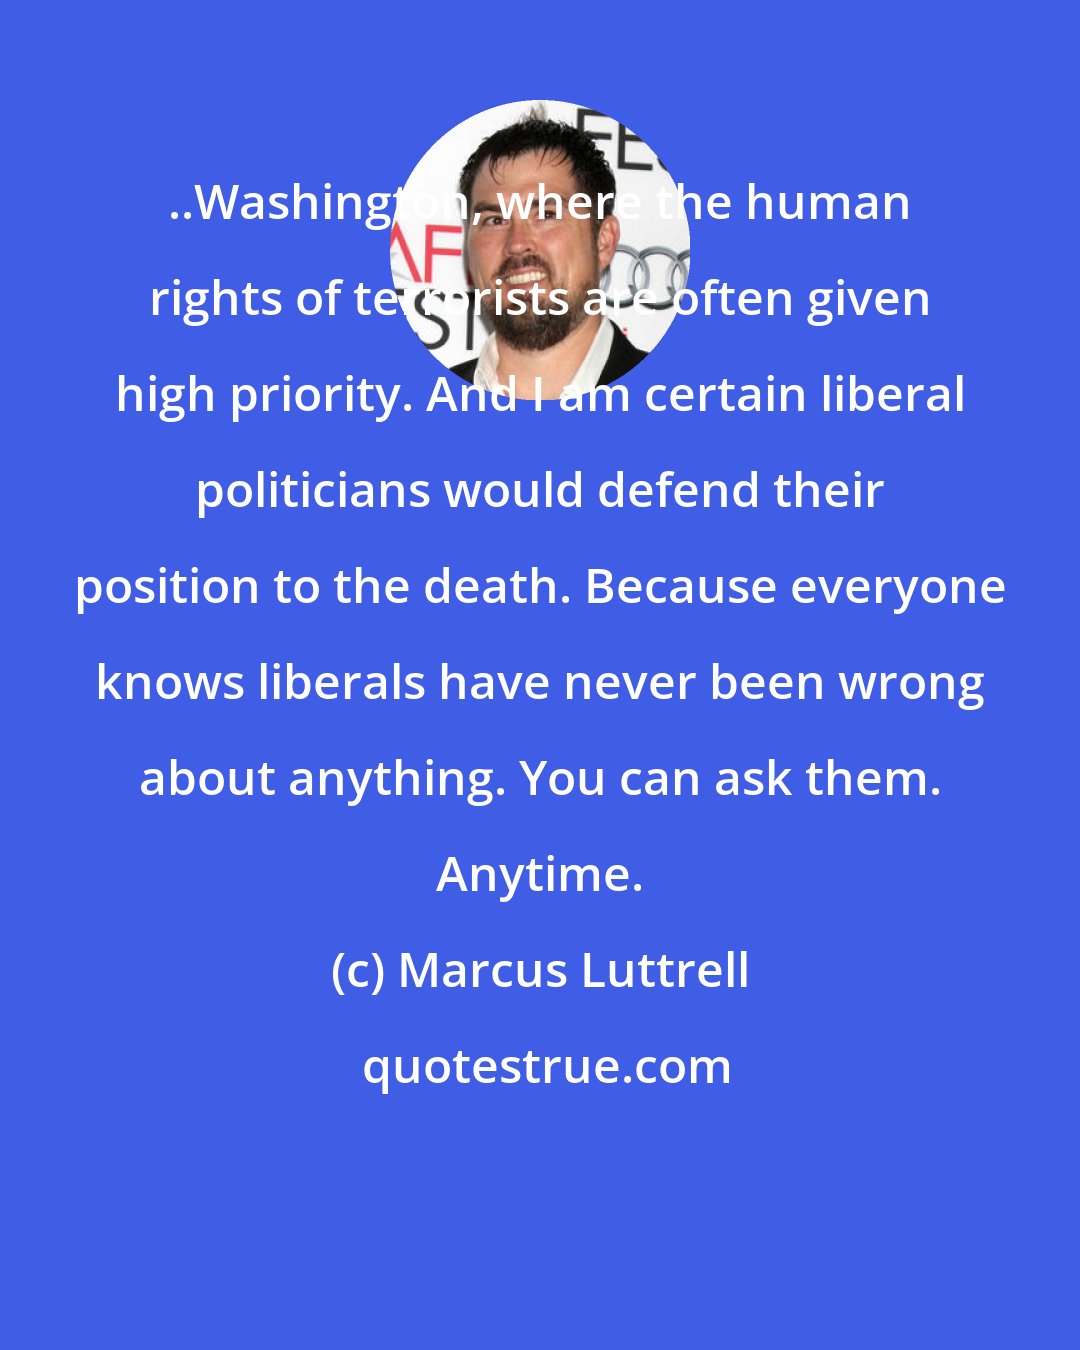 Marcus Luttrell: ..Washington, where the human rights of terrorists are often given high priority. And I am certain liberal politicians would defend their position to the death. Because everyone knows liberals have never been wrong about anything. You can ask them. Anytime.